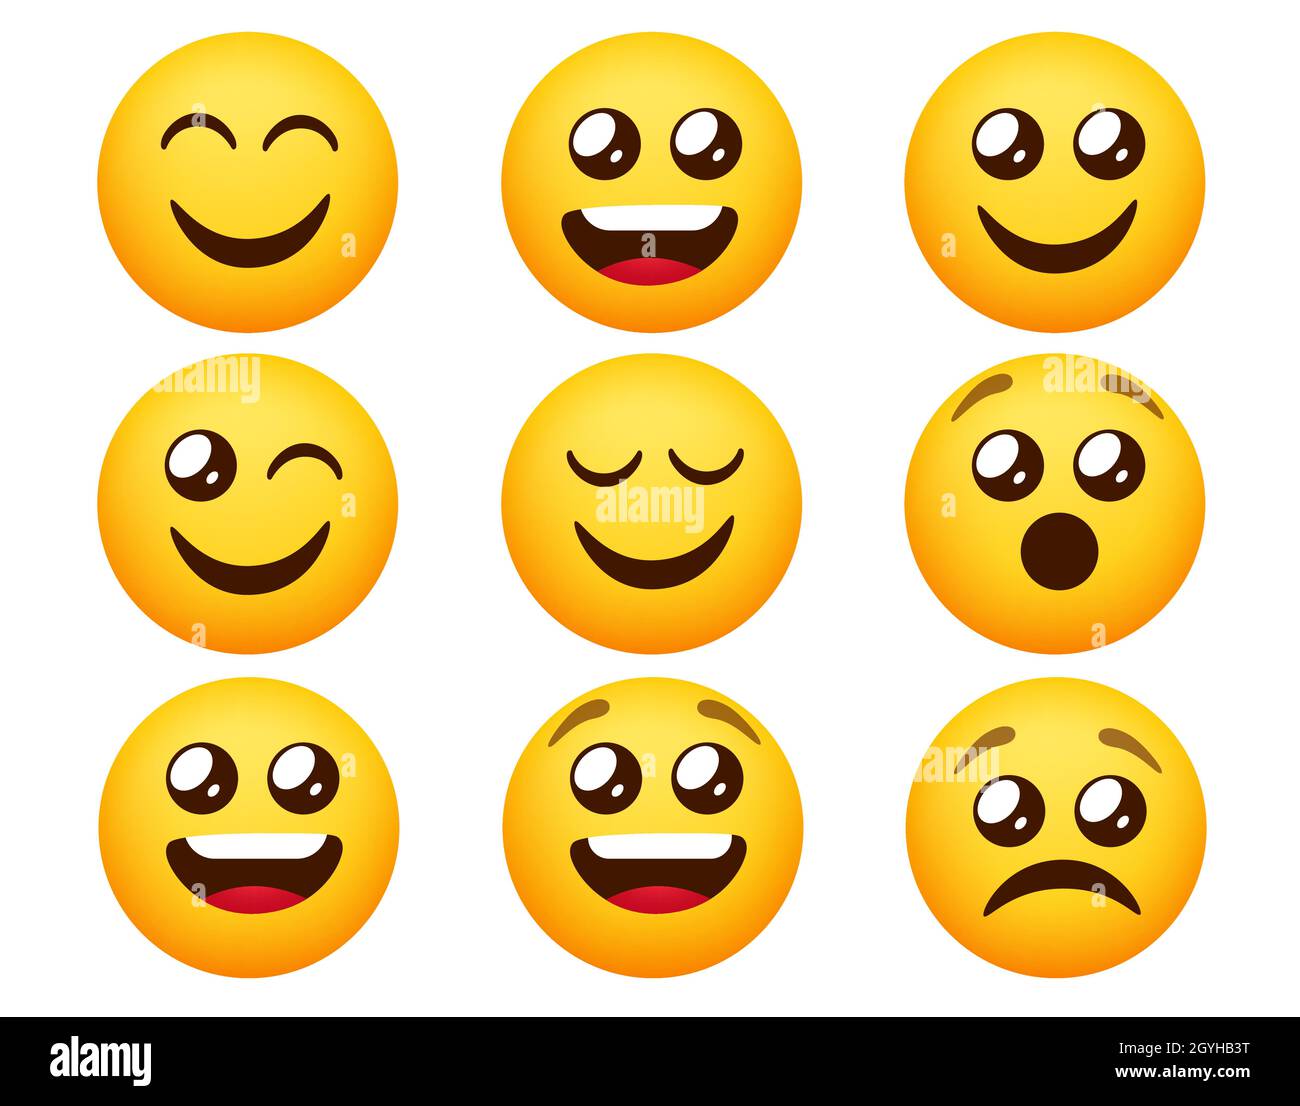 Smileys emoticon vector set. Emoticons smiley characters in happy and sad mood expressions isolated in white background for emoji character collection. Stock Vector